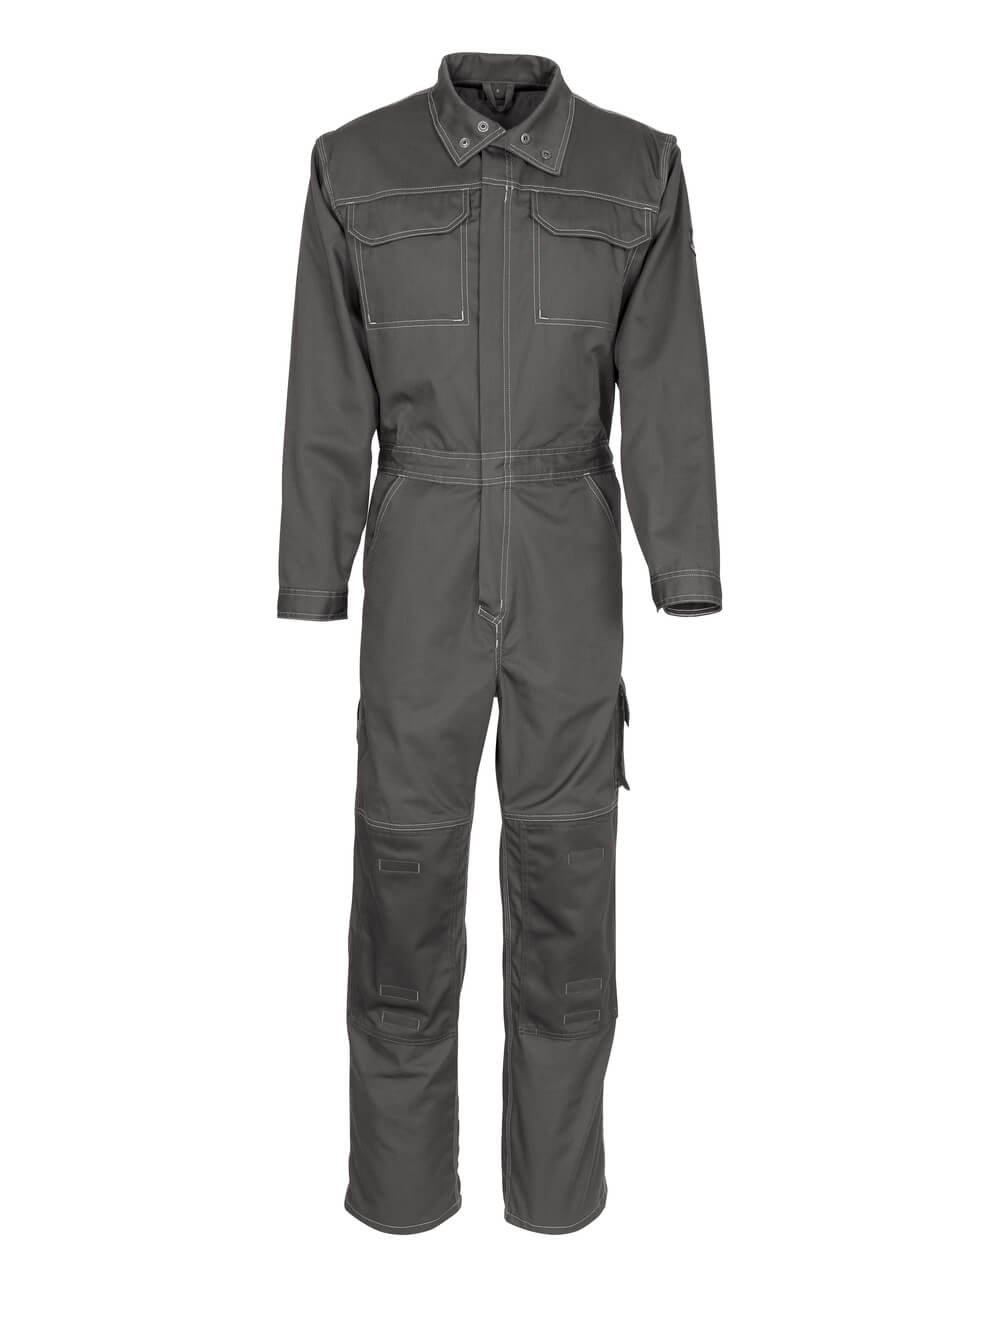 Mascot INDUSTRY  Danville Boilersuit with kneepad pockets 12311 dark anthracite